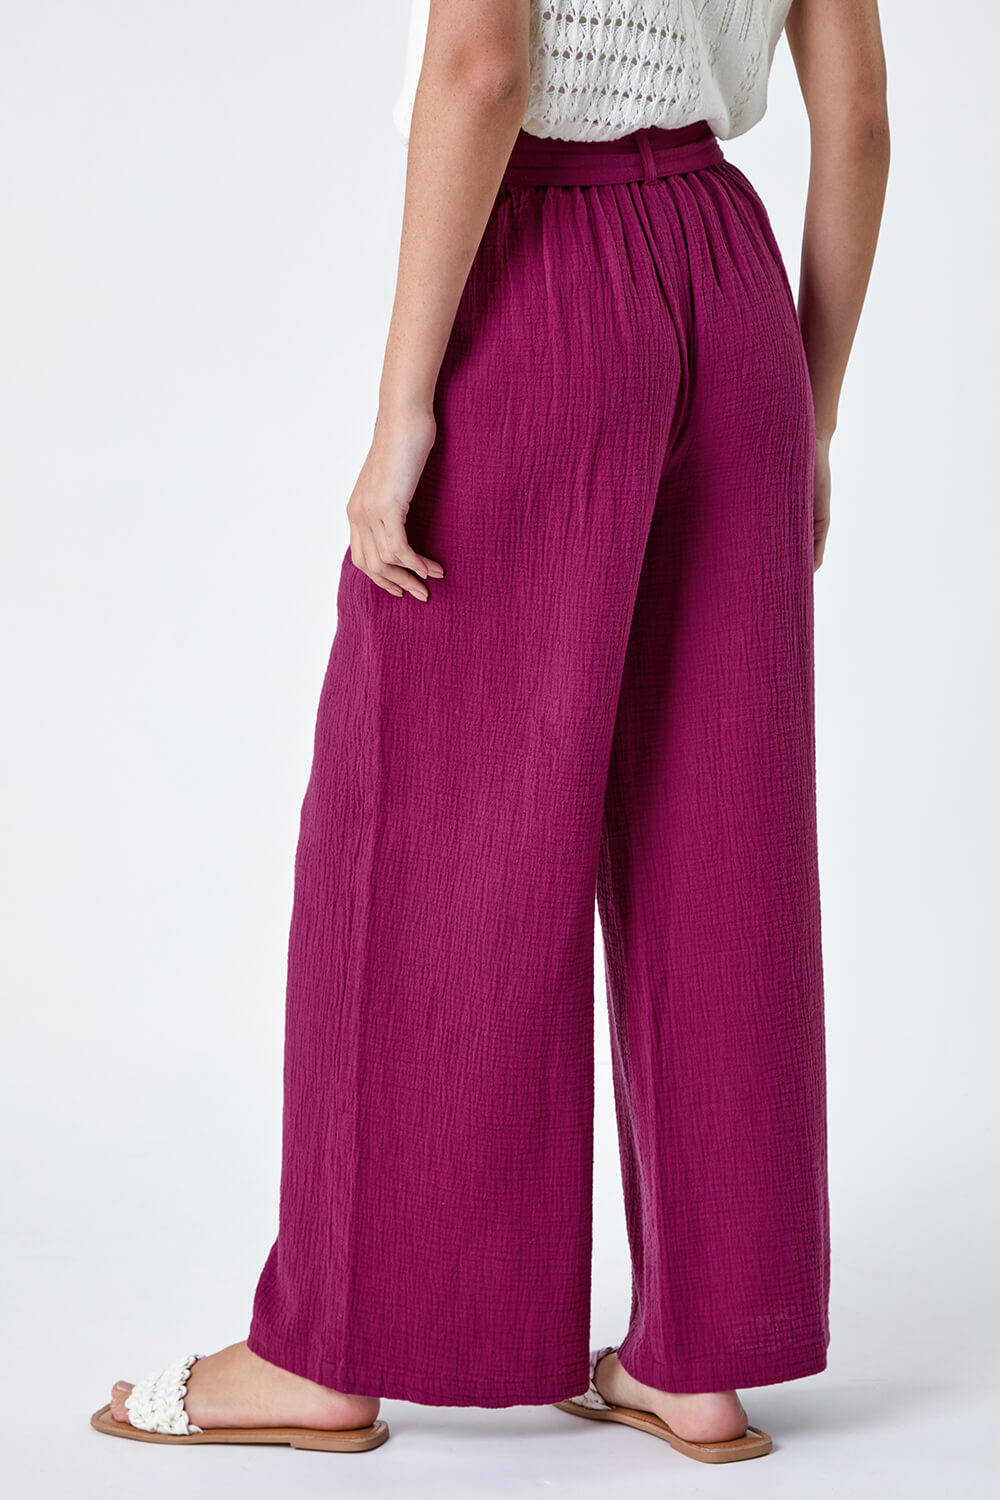 MAGENTA Textured Cotton Wide Leg Trousers, Image 3 of 5